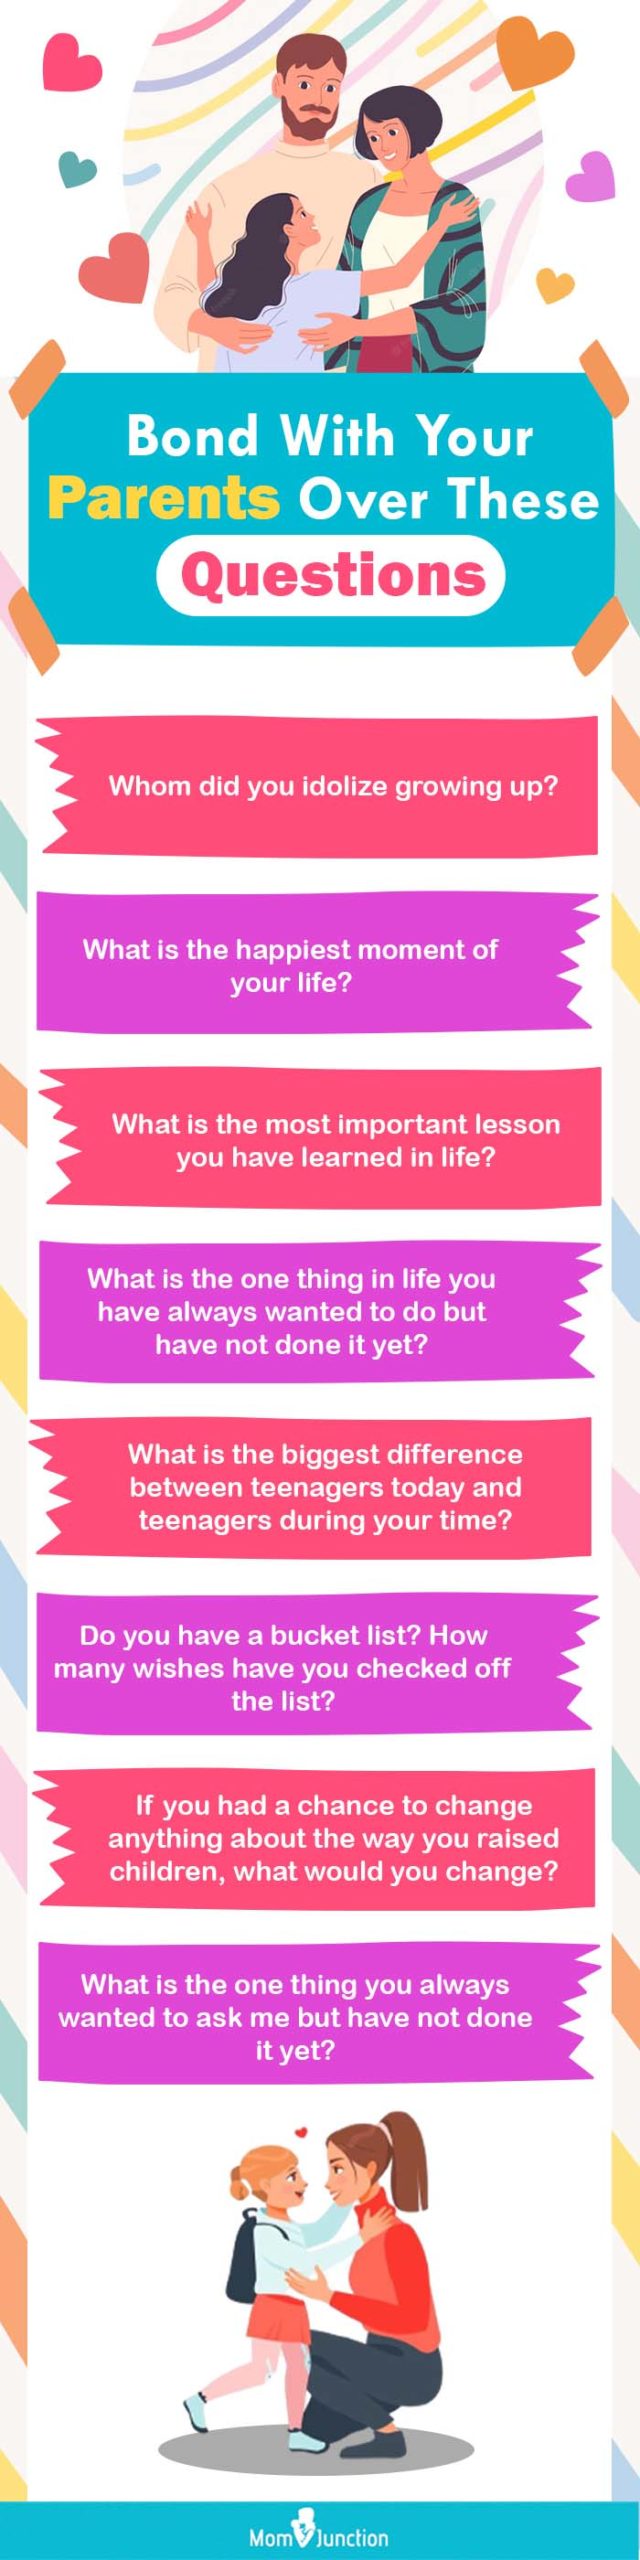 One of the Most Important Things Our Teens Need From Us - What